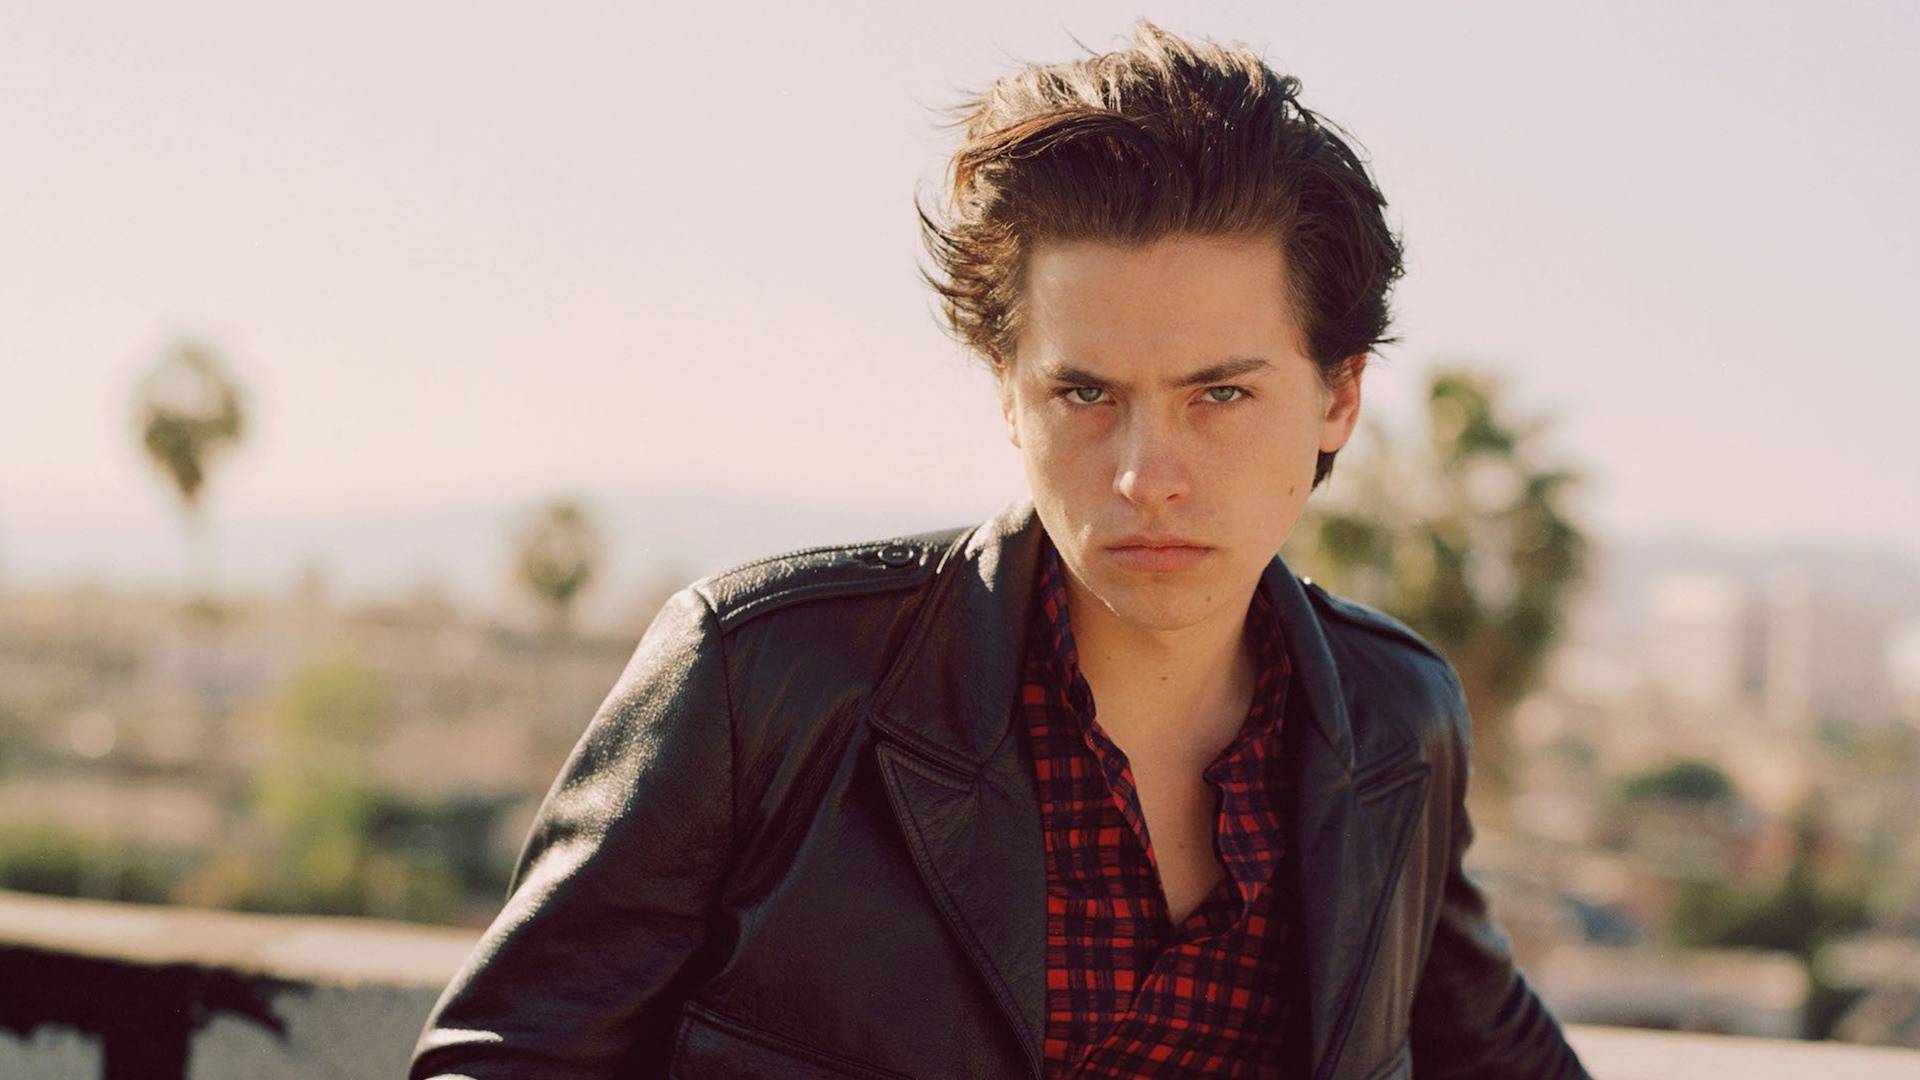 Cole Sprouse TV Shows, HD wallpapers, Heartthrob actor, 1920x1080 Full HD Desktop